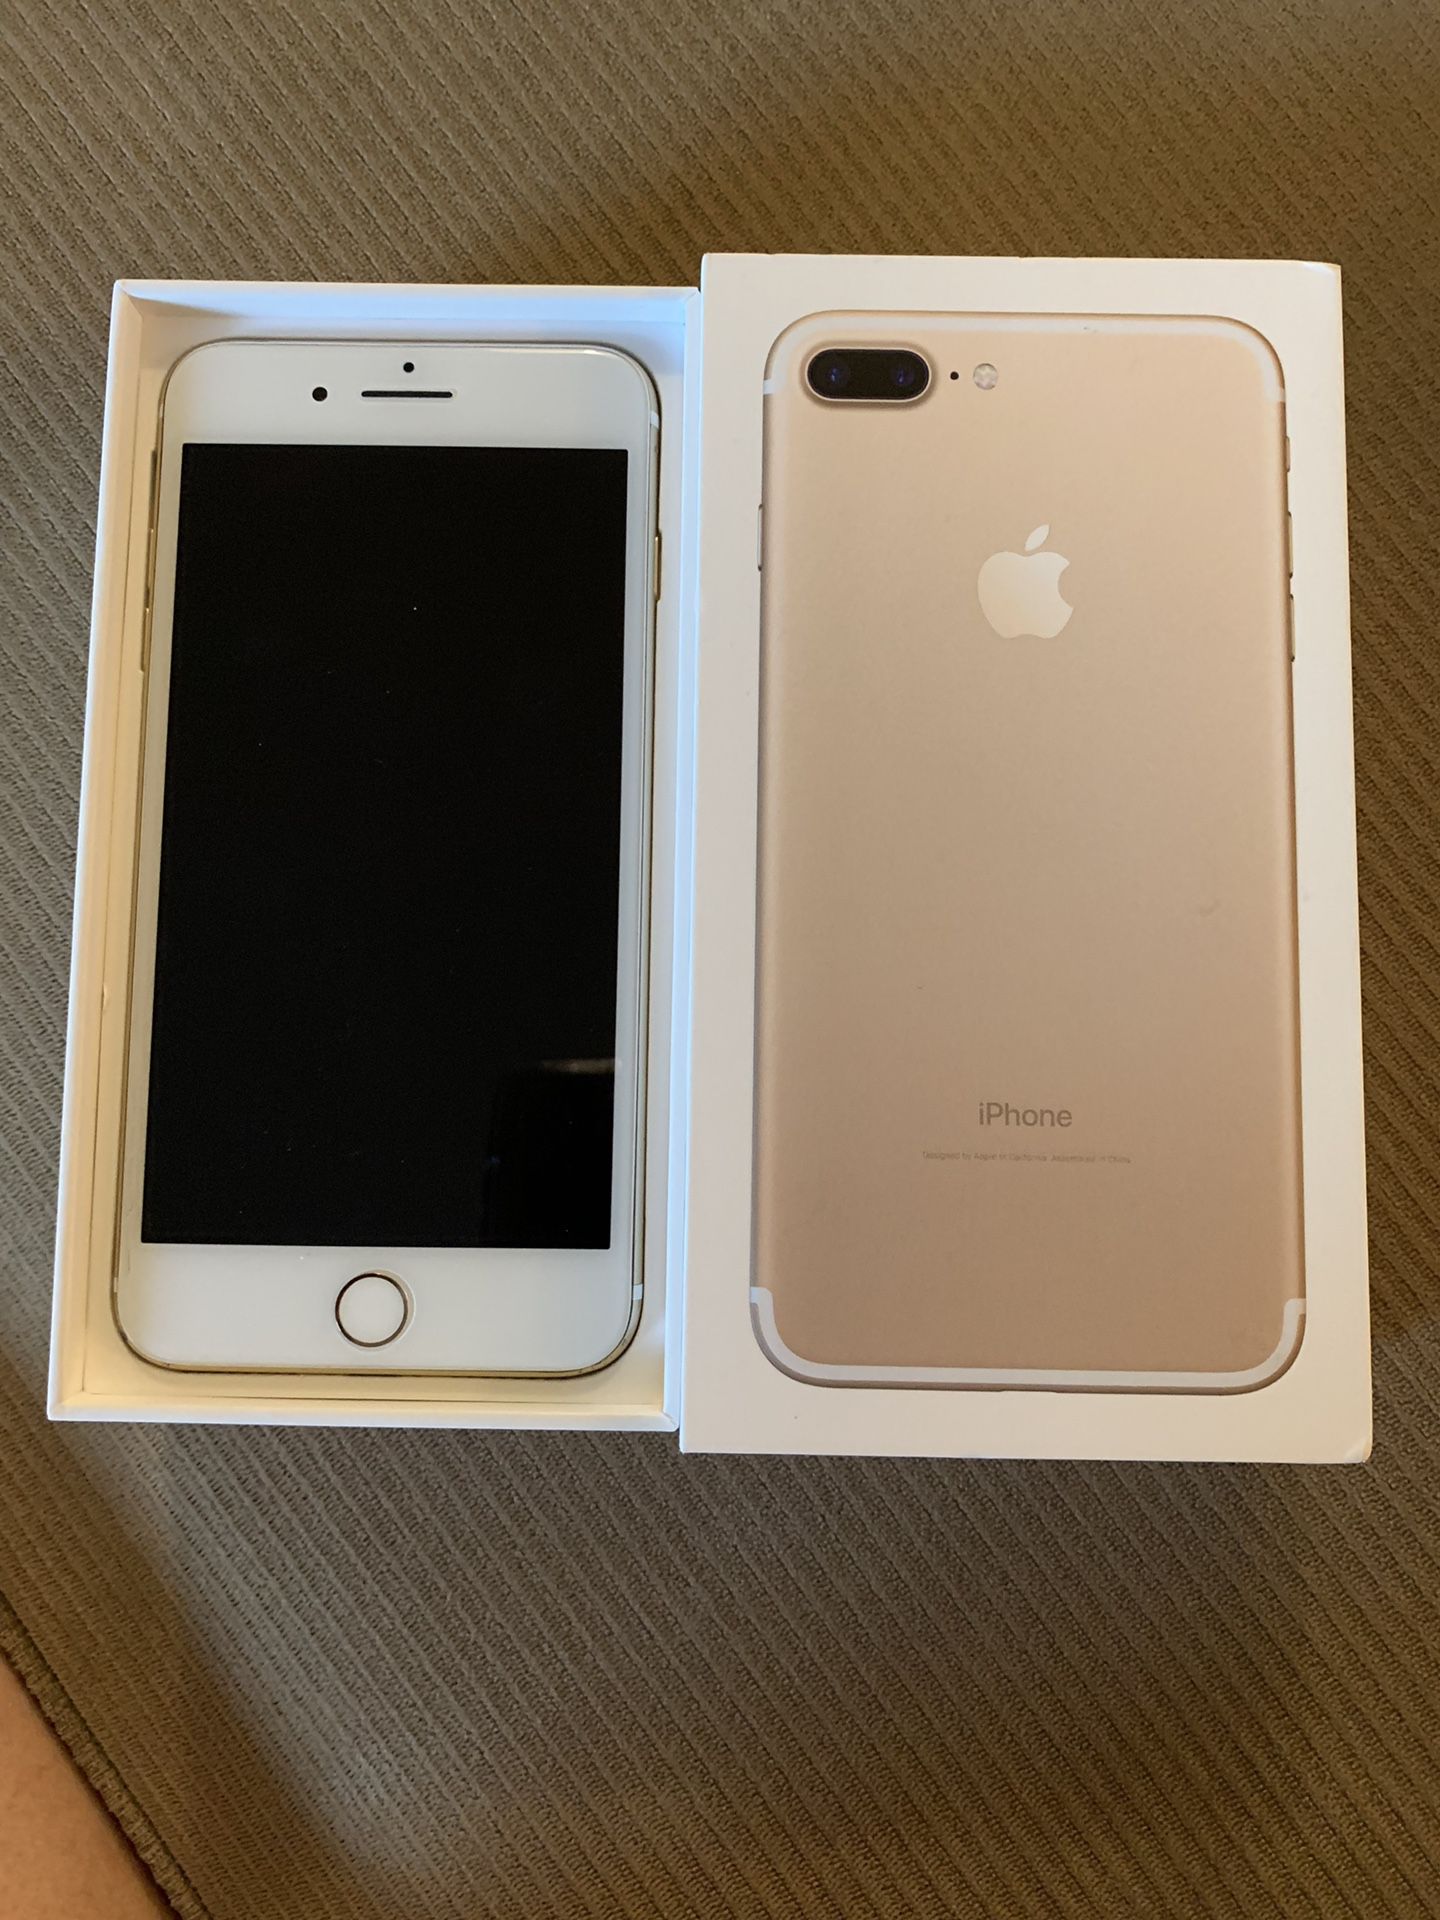 iPhone 7plus excellent pristine condition... only one left (silver) unlocked just put your SIM card and activate